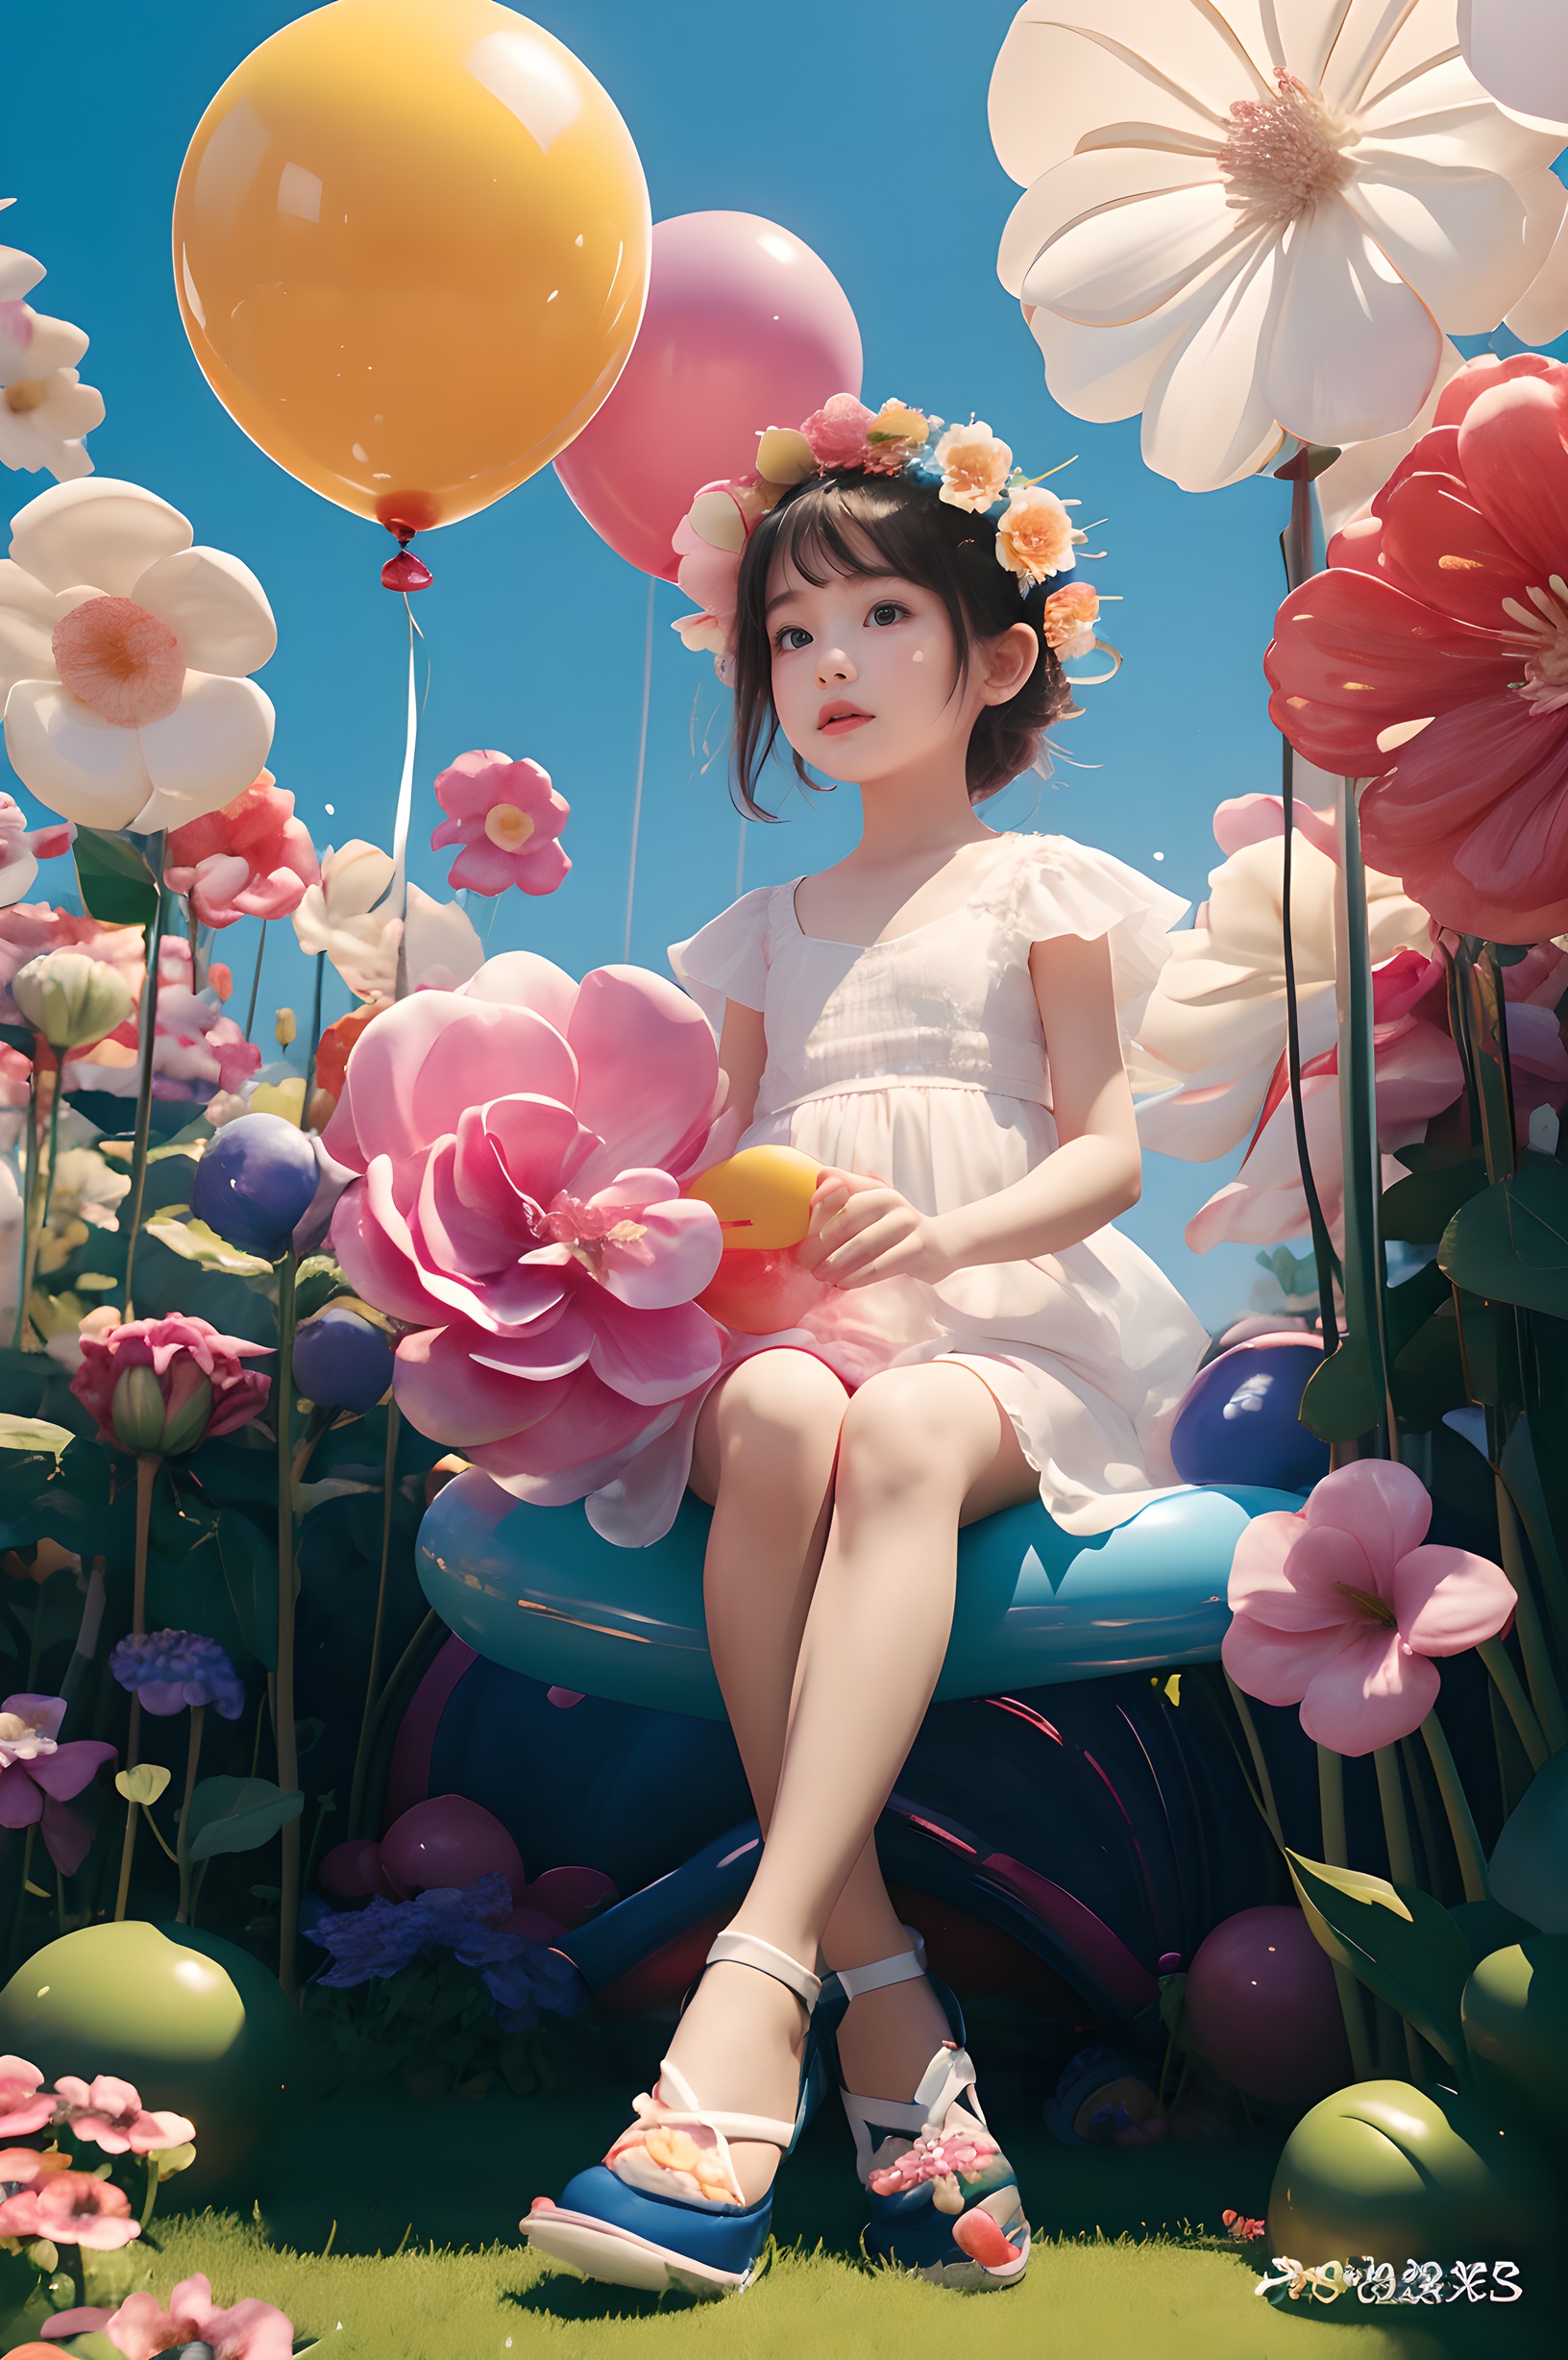 baby,3 years old,female children,<lora:Balloon Flowers_V10:0.6>,(sitting on a balloon),blooming flowers,(((the huge flower contrasts with the tiny girl))),middle of stamens,balloon flower,balloon,dream scene,CAD,unreal engine,shoes, <lora:Balloon Flowers_20231120130603:0.7>